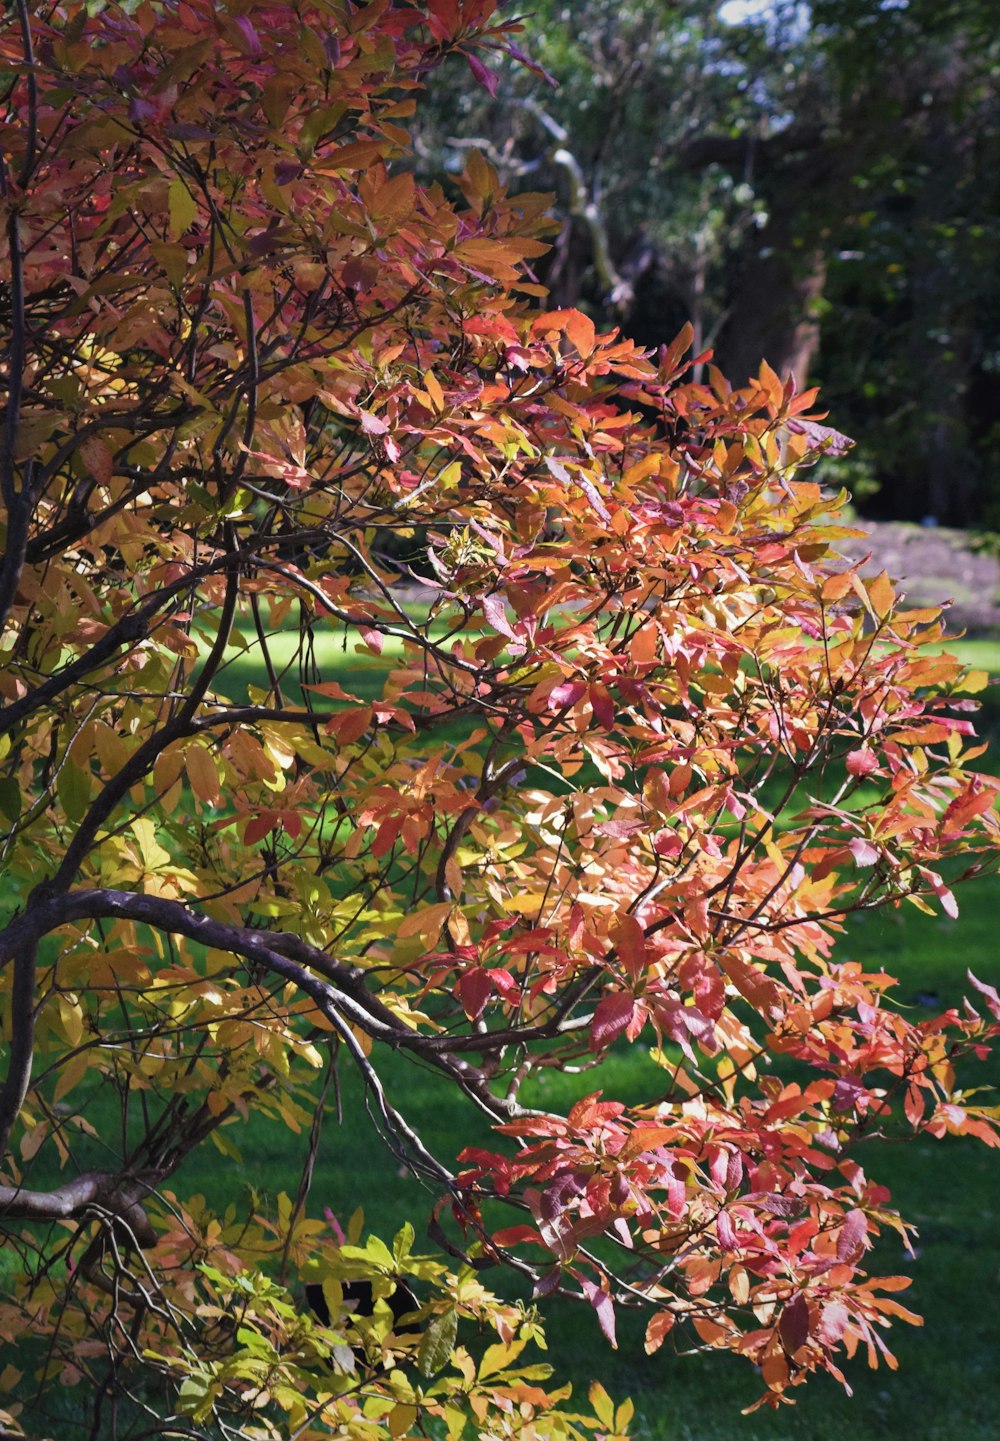 a tree with red and yellow leaves in a park